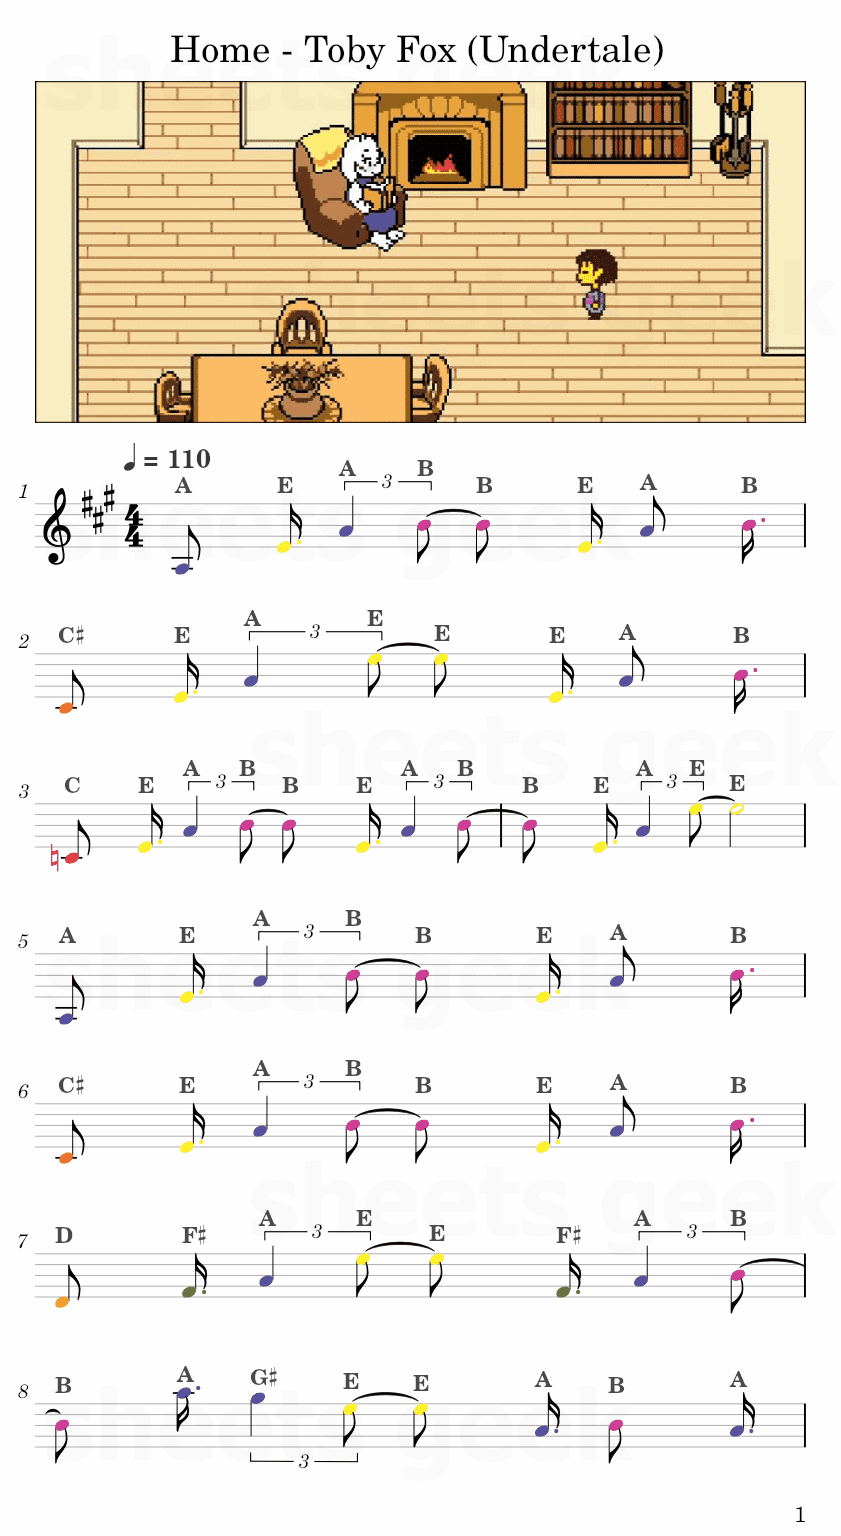 Home - Toby Fox Undertale Easy Sheet Music Free for piano, keyboard, flute, violin, sax, cello page 1